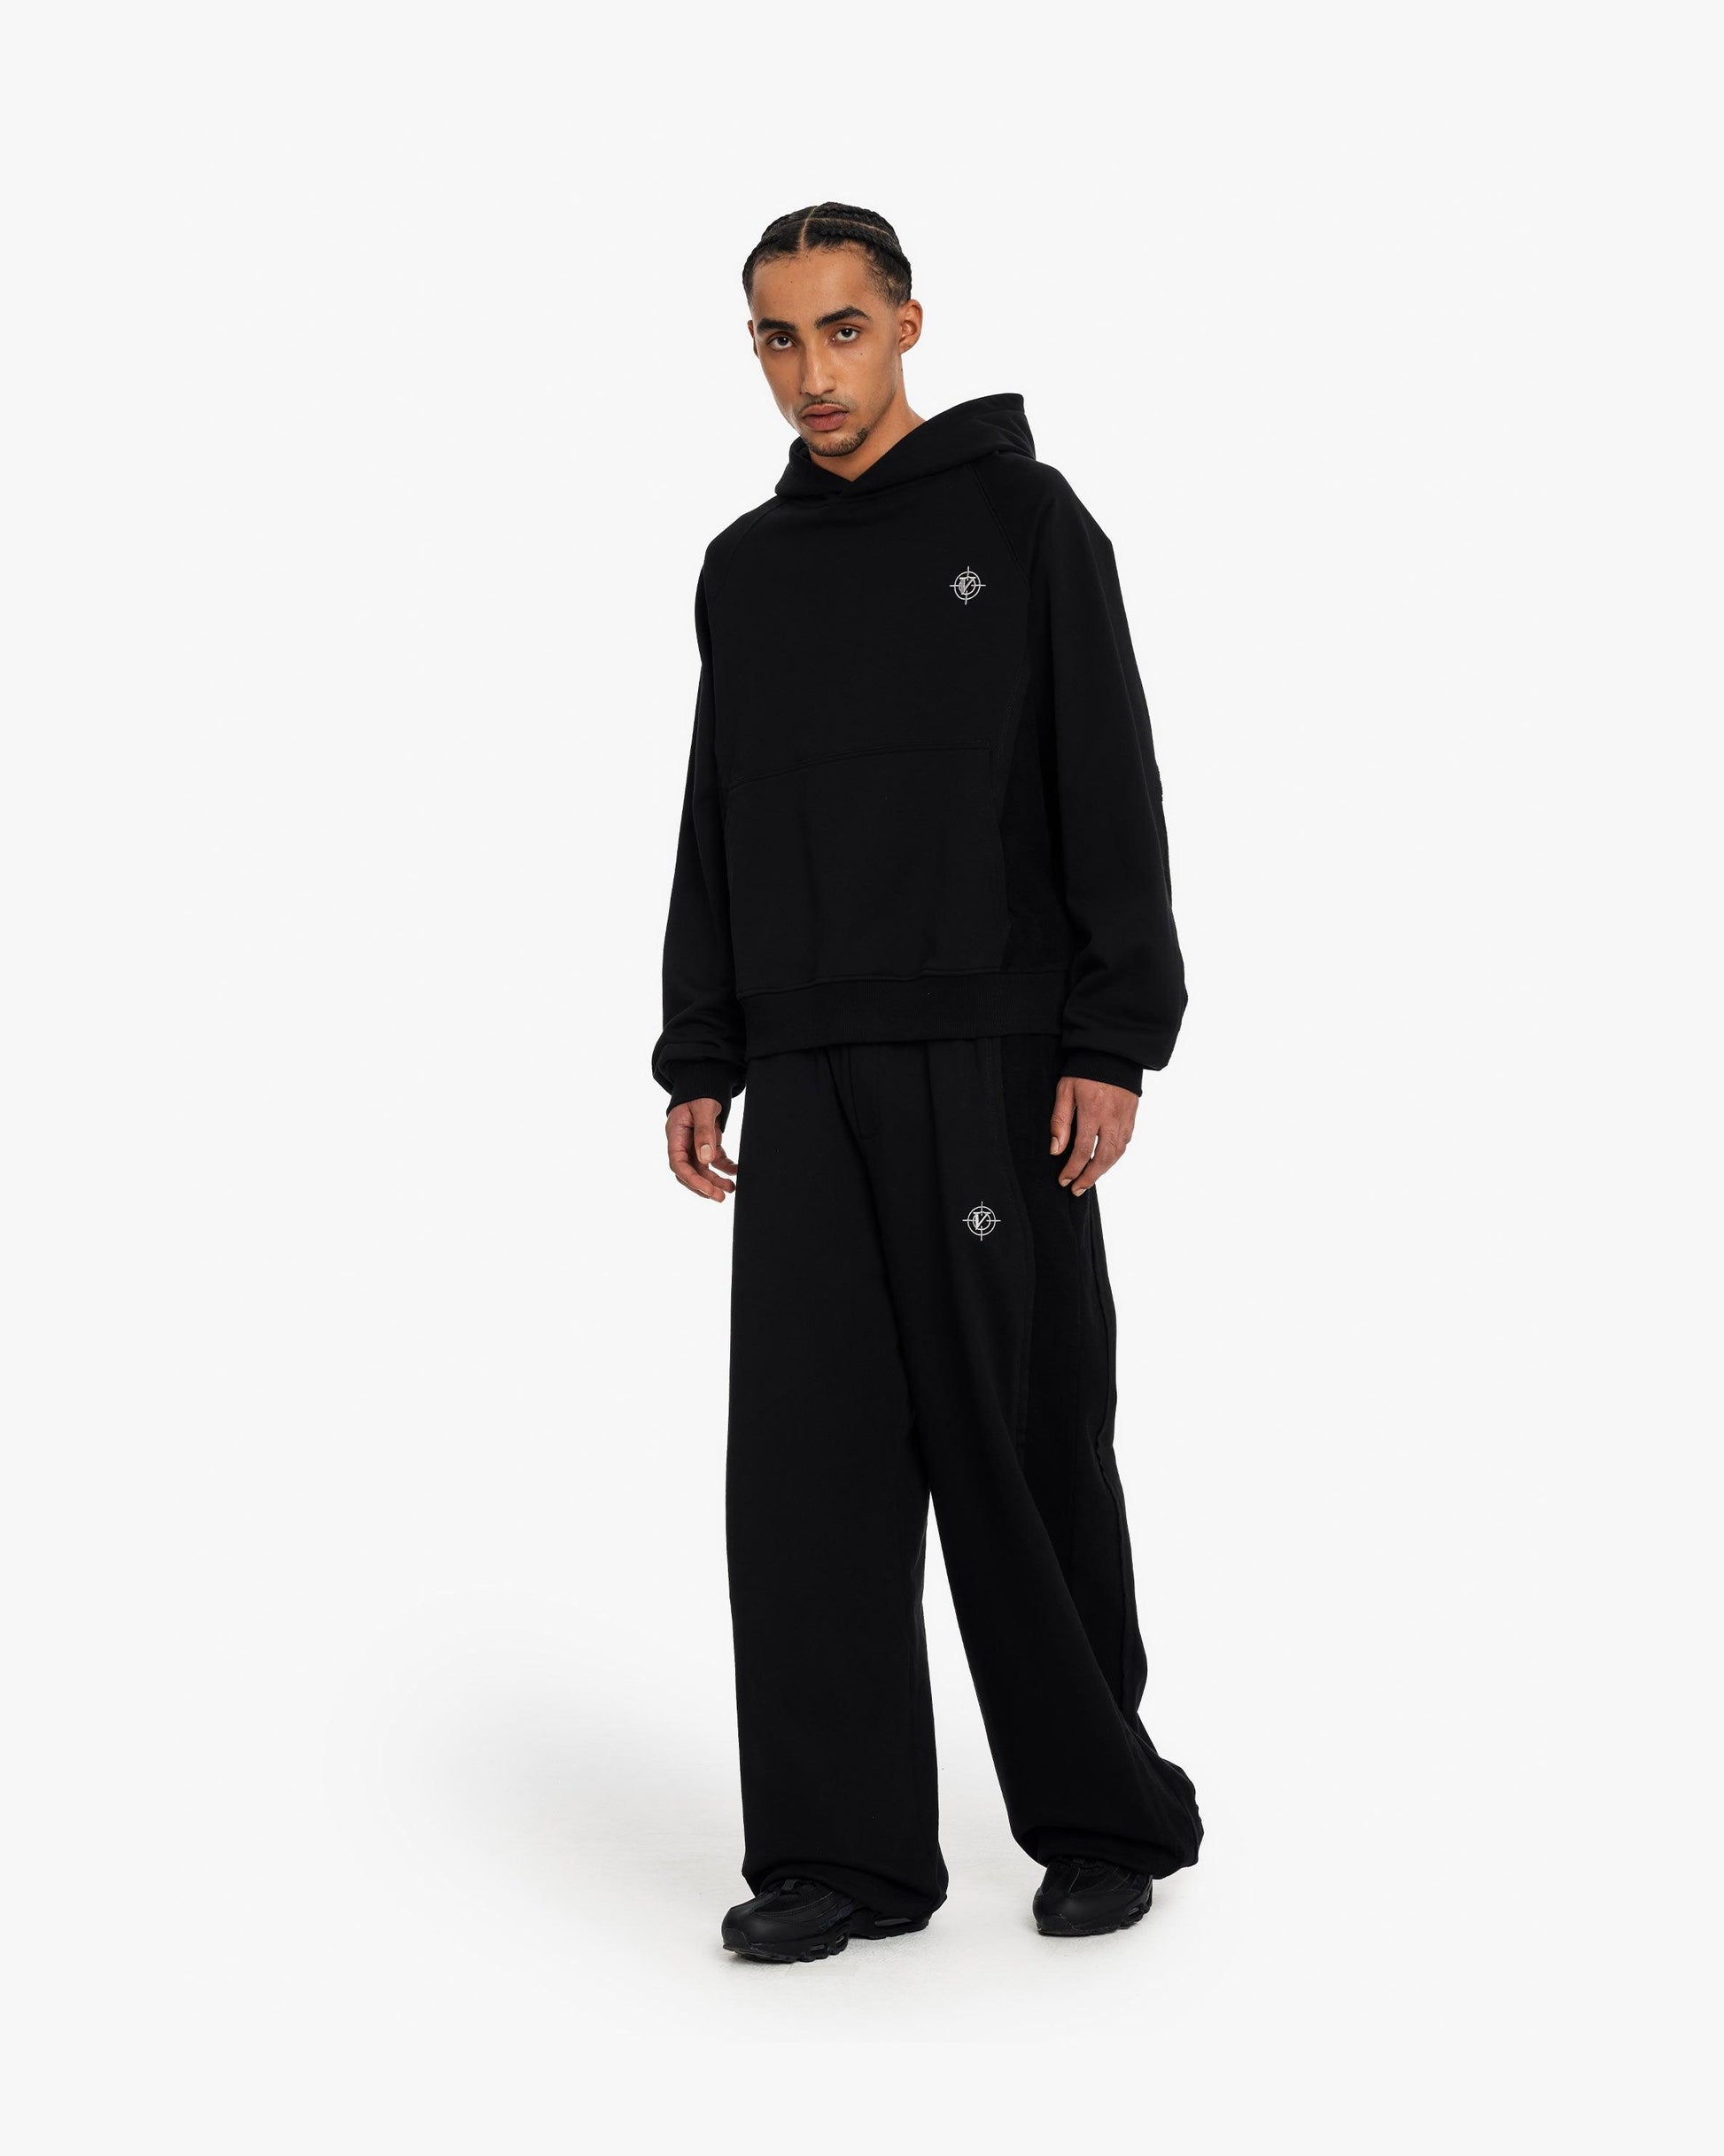 INSIDE OUT HOODIE BLACK - VICINITY